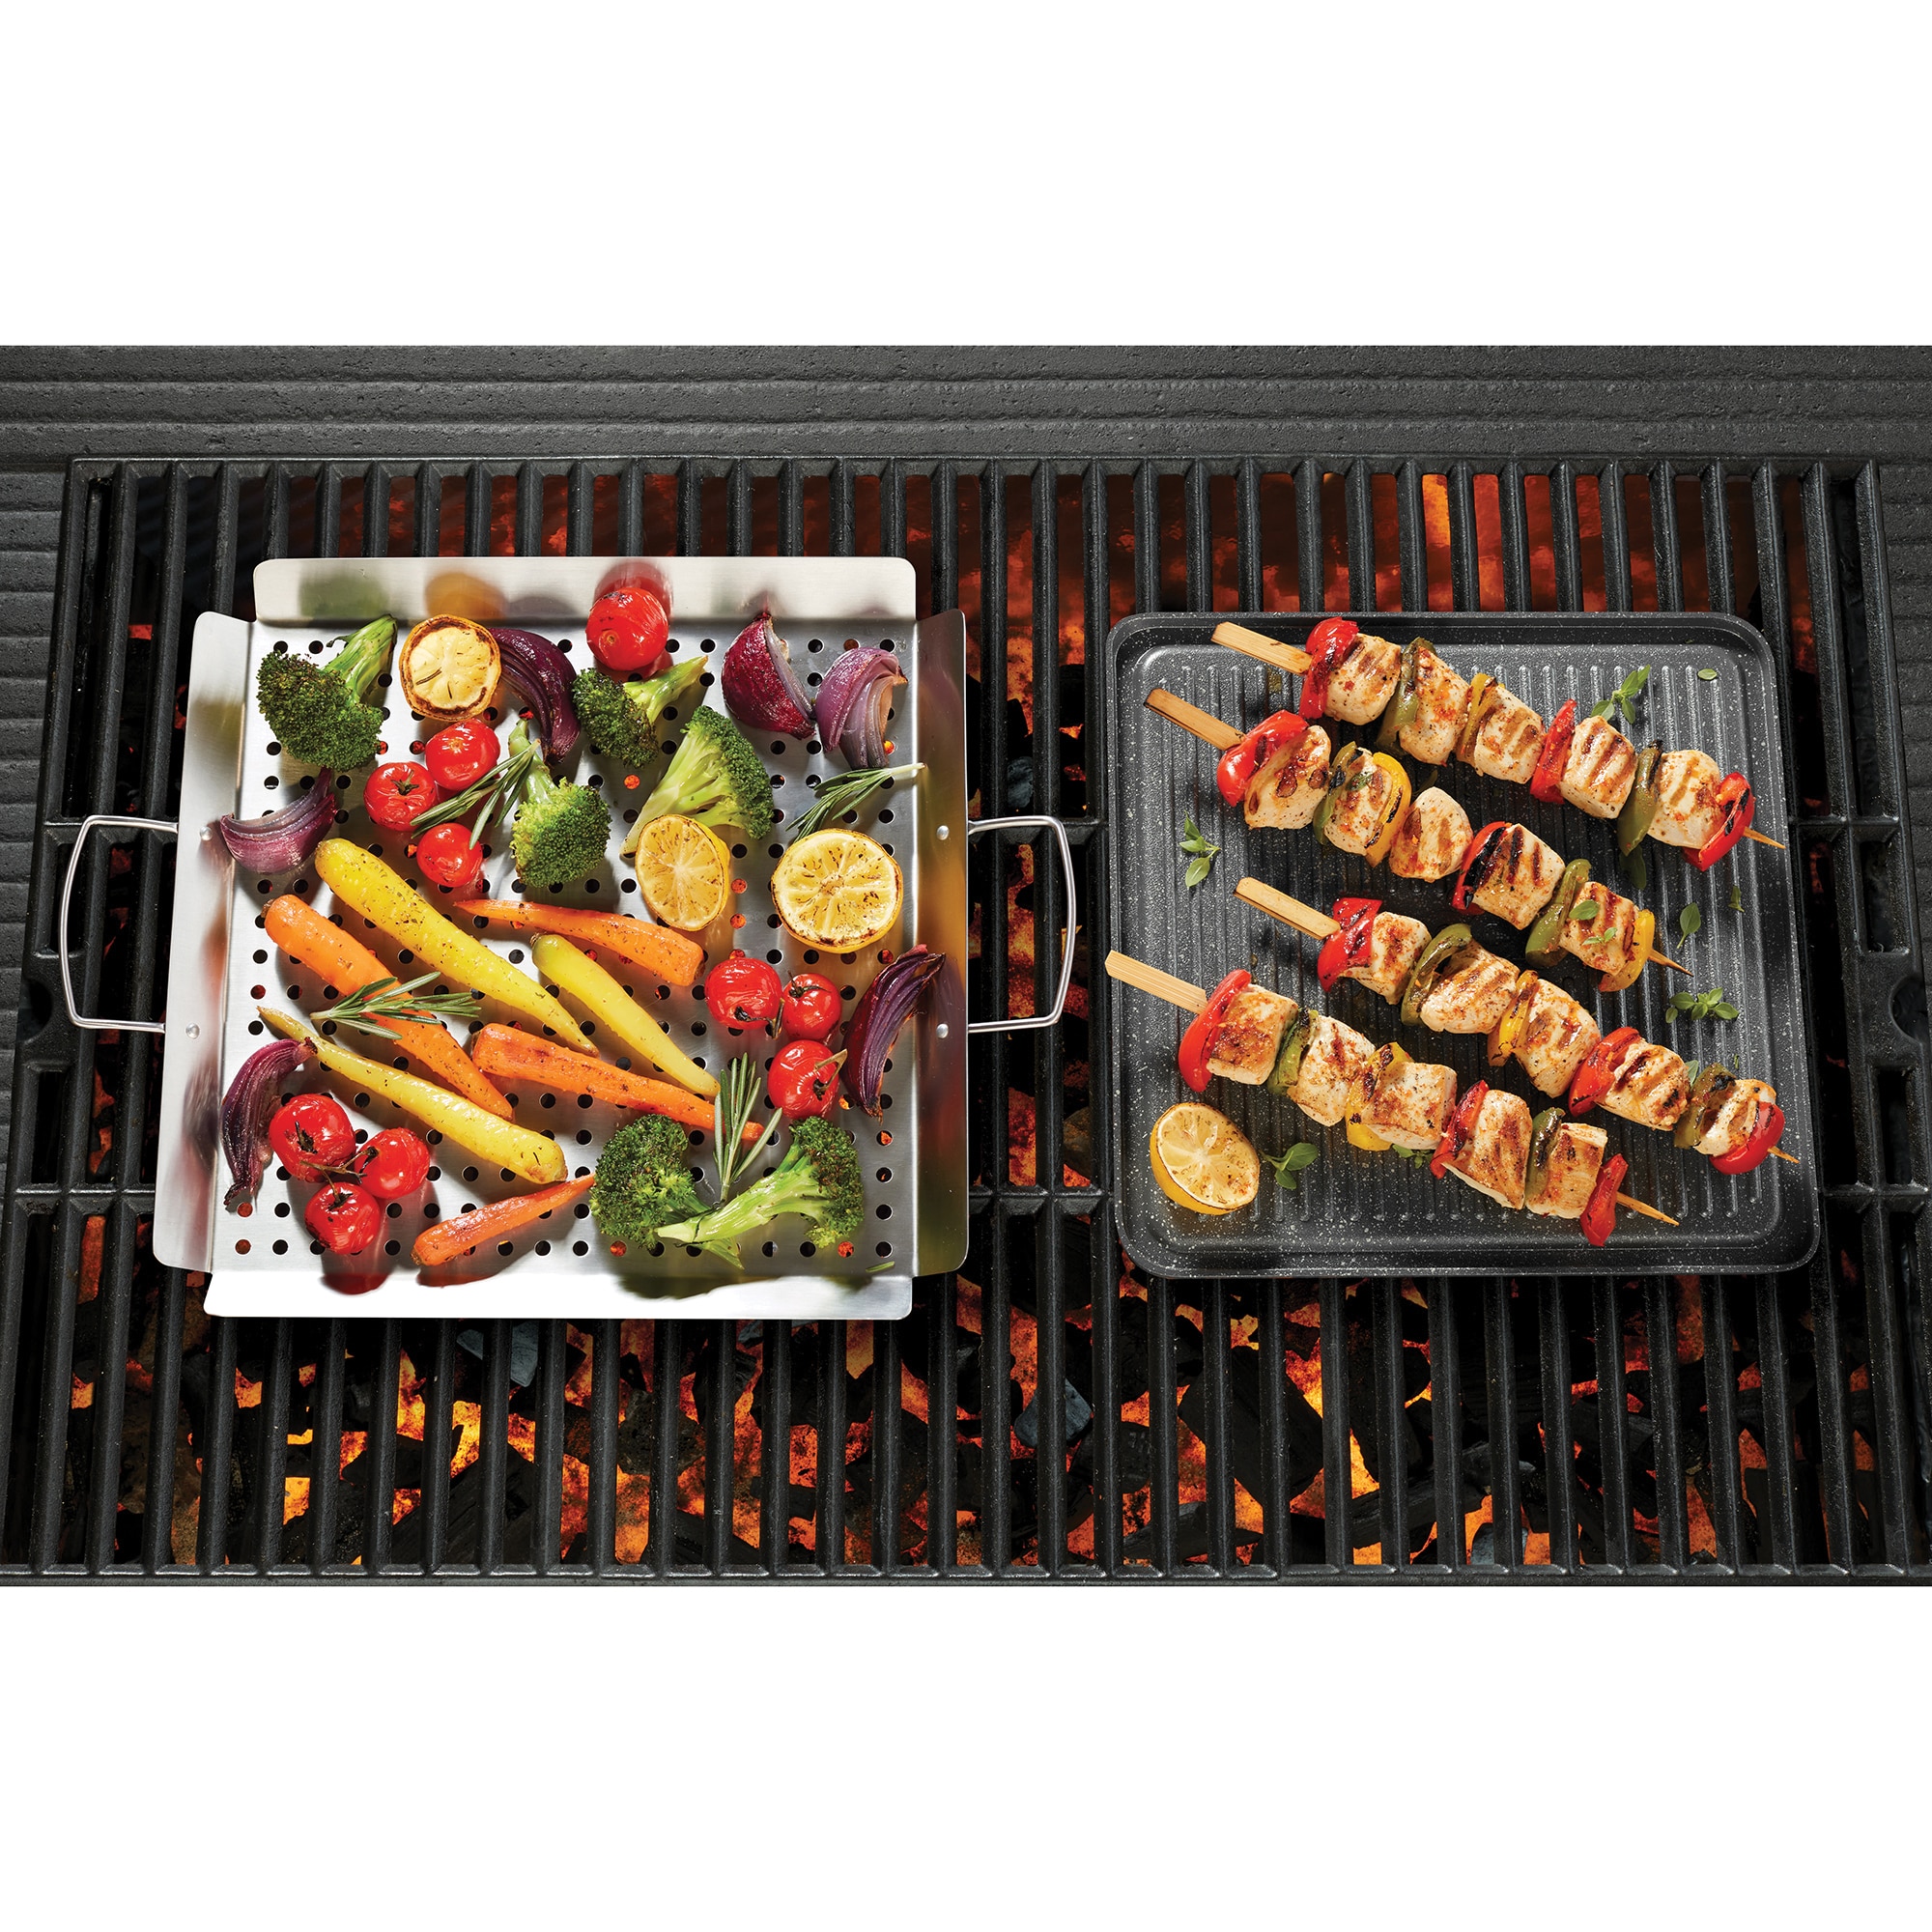 Starfrit The Rock 19.5 x 11 Reversible Grill and Griddle - Black